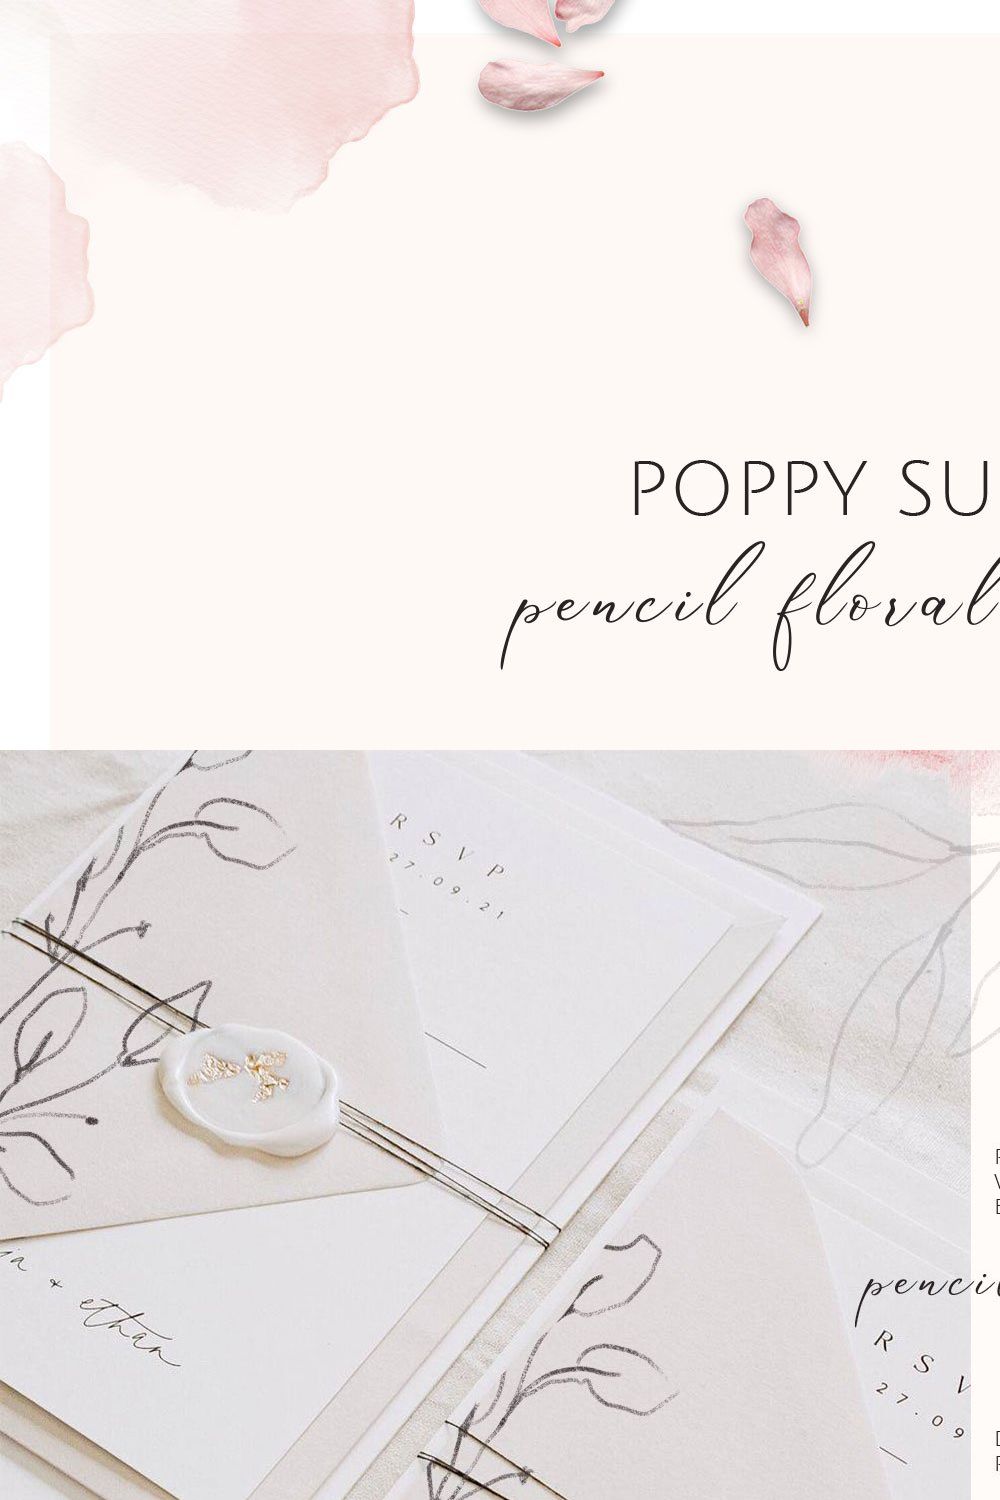 POPPY SUNSET pencil floral sketches pinterest preview image.